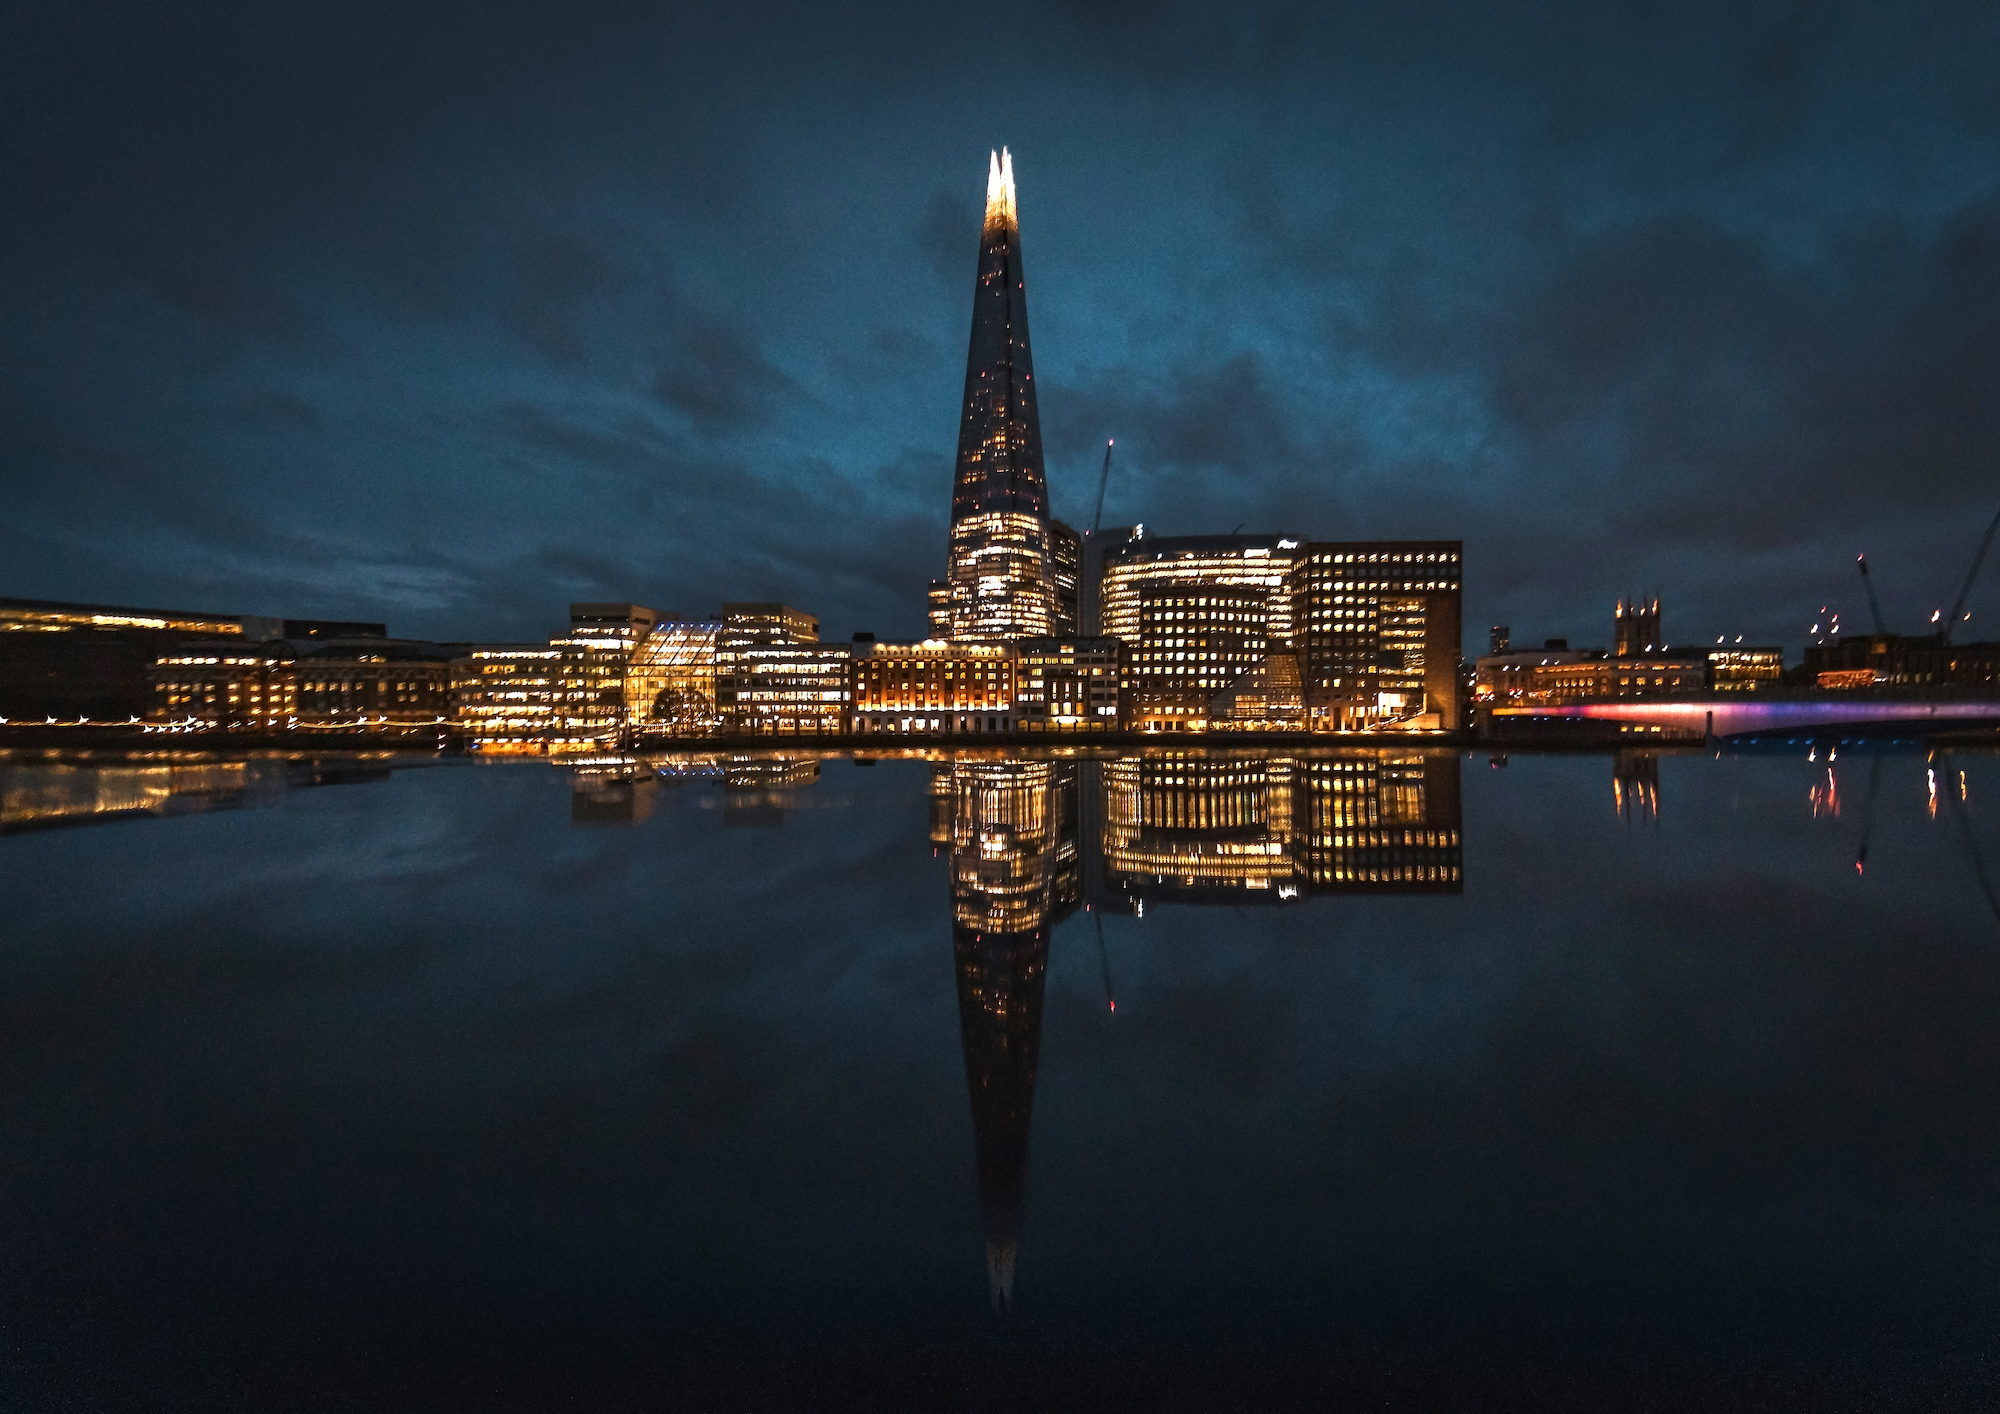 The Shard and its reflection in the Thames